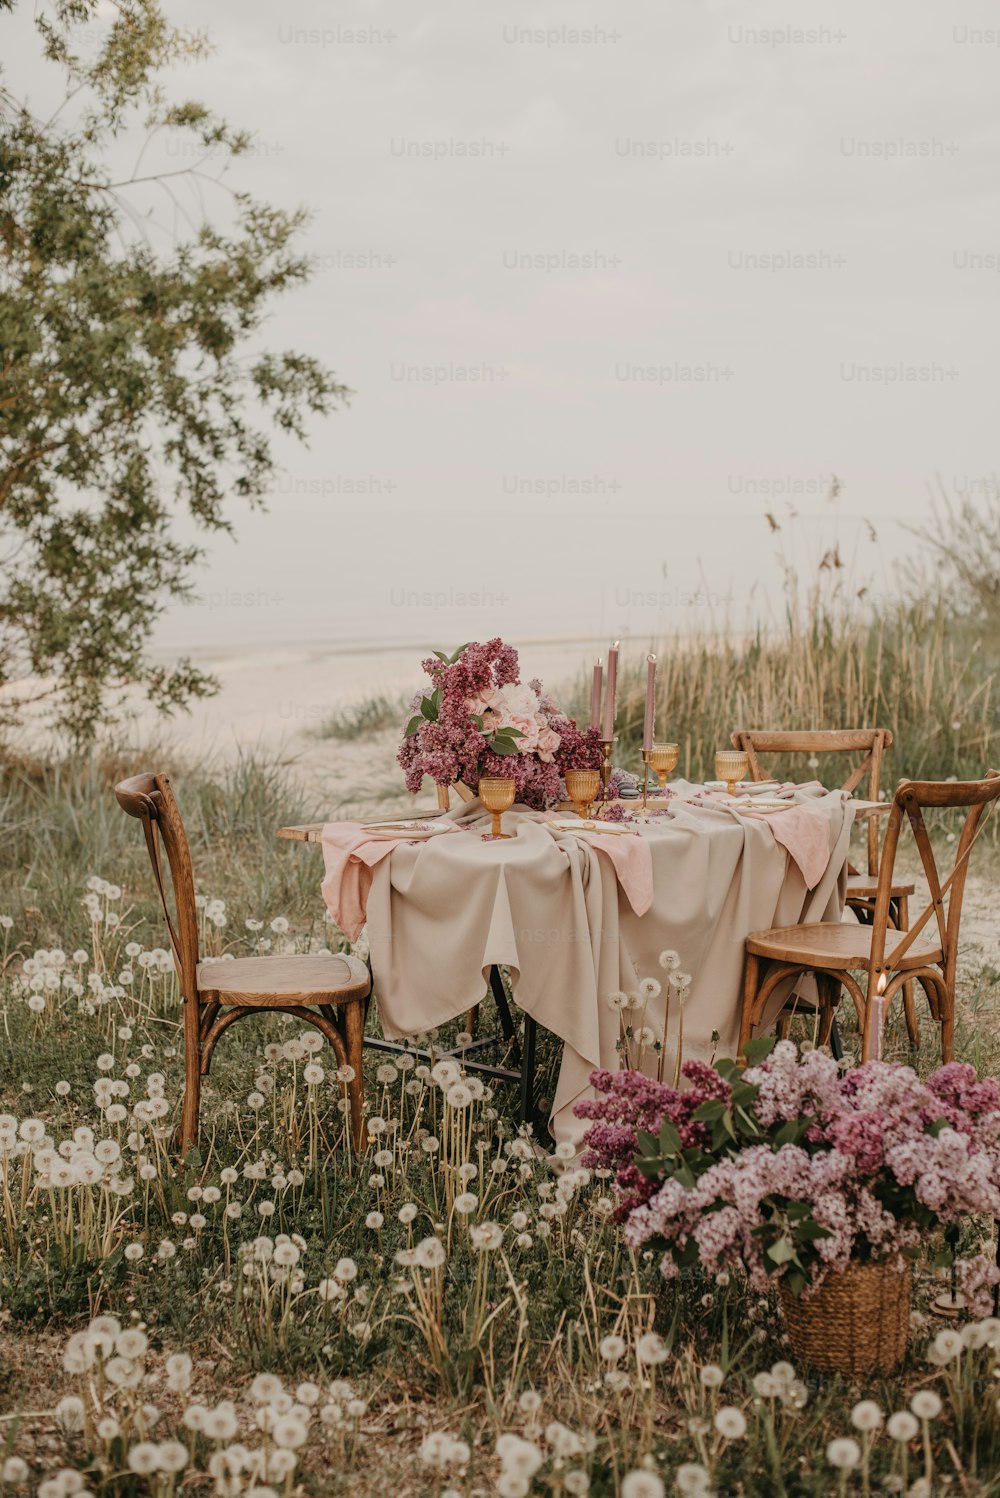 a table is set with a pink tablecloth and flowers